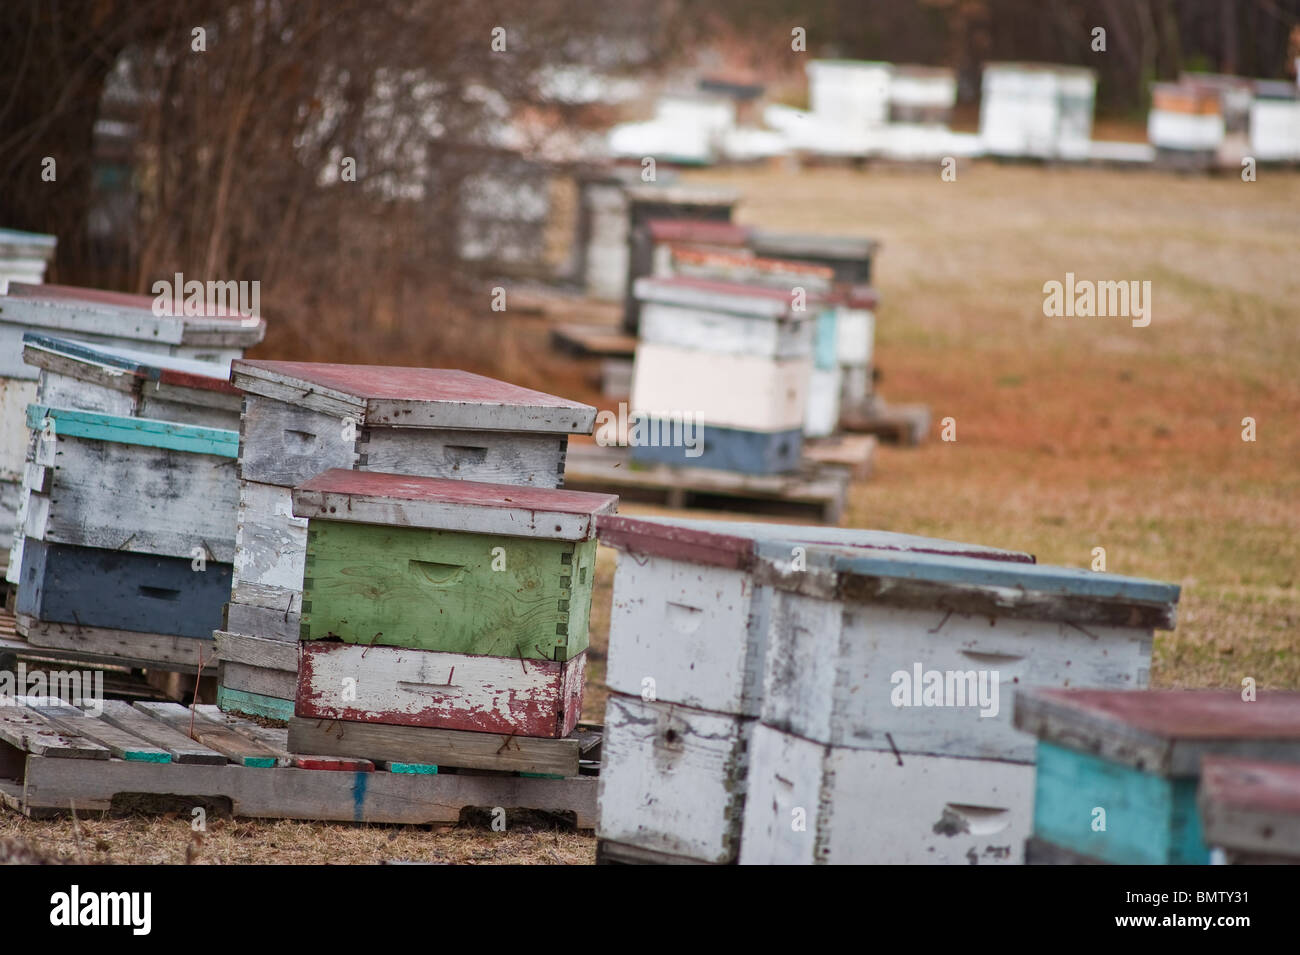 Bee keeper's hives, Manistee county, Michigan Stock Photo